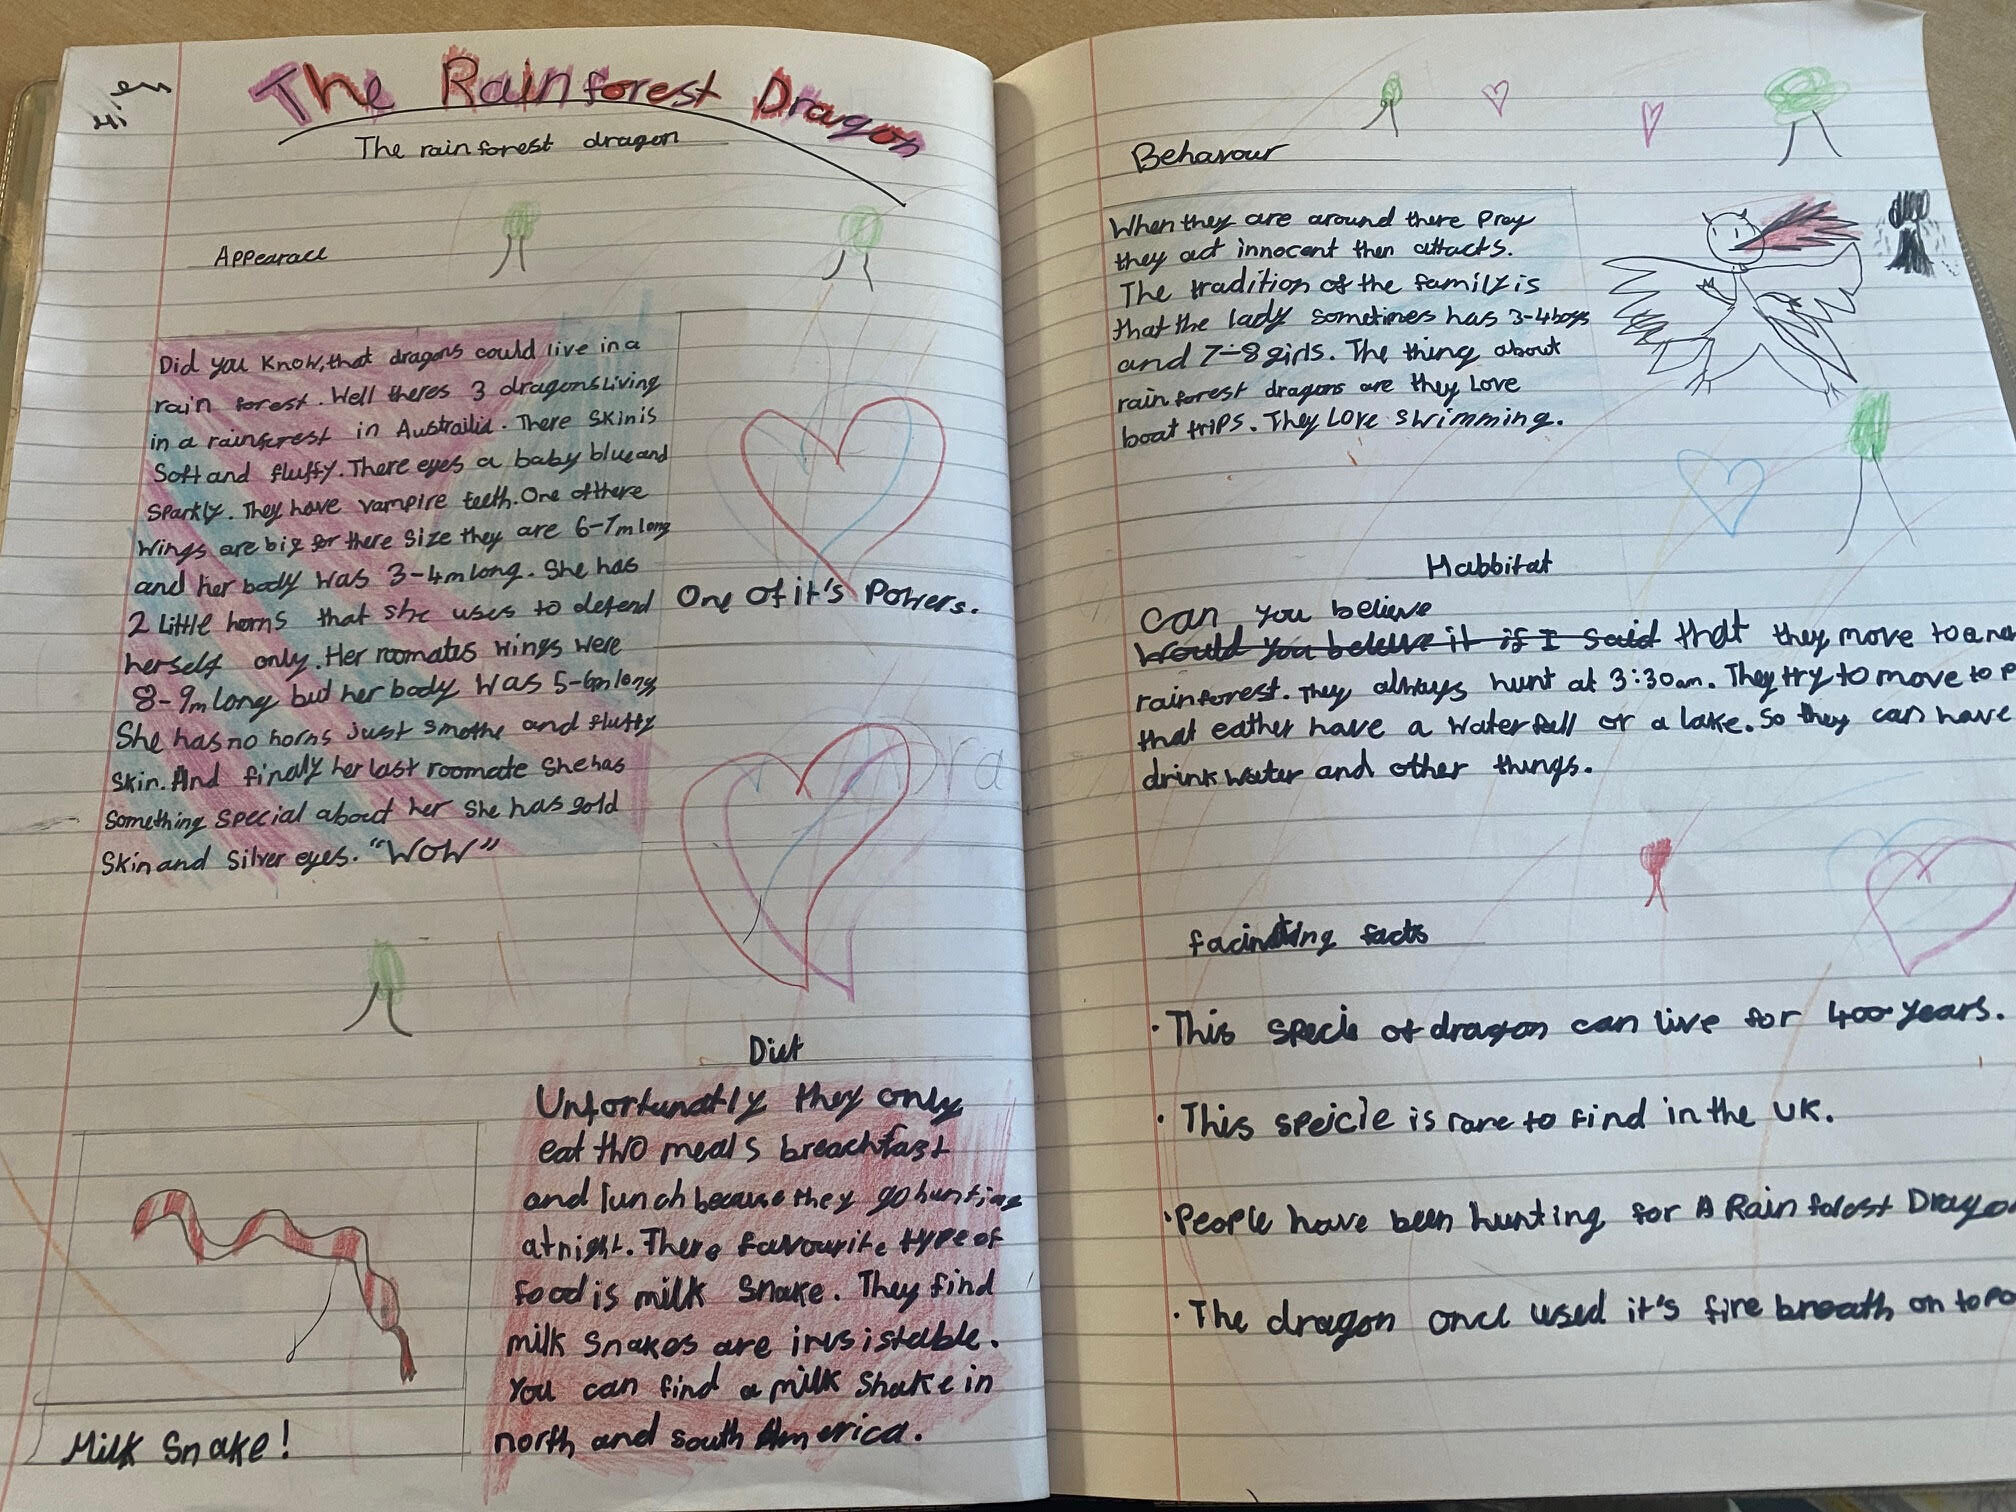 writing a non chronological report year 4